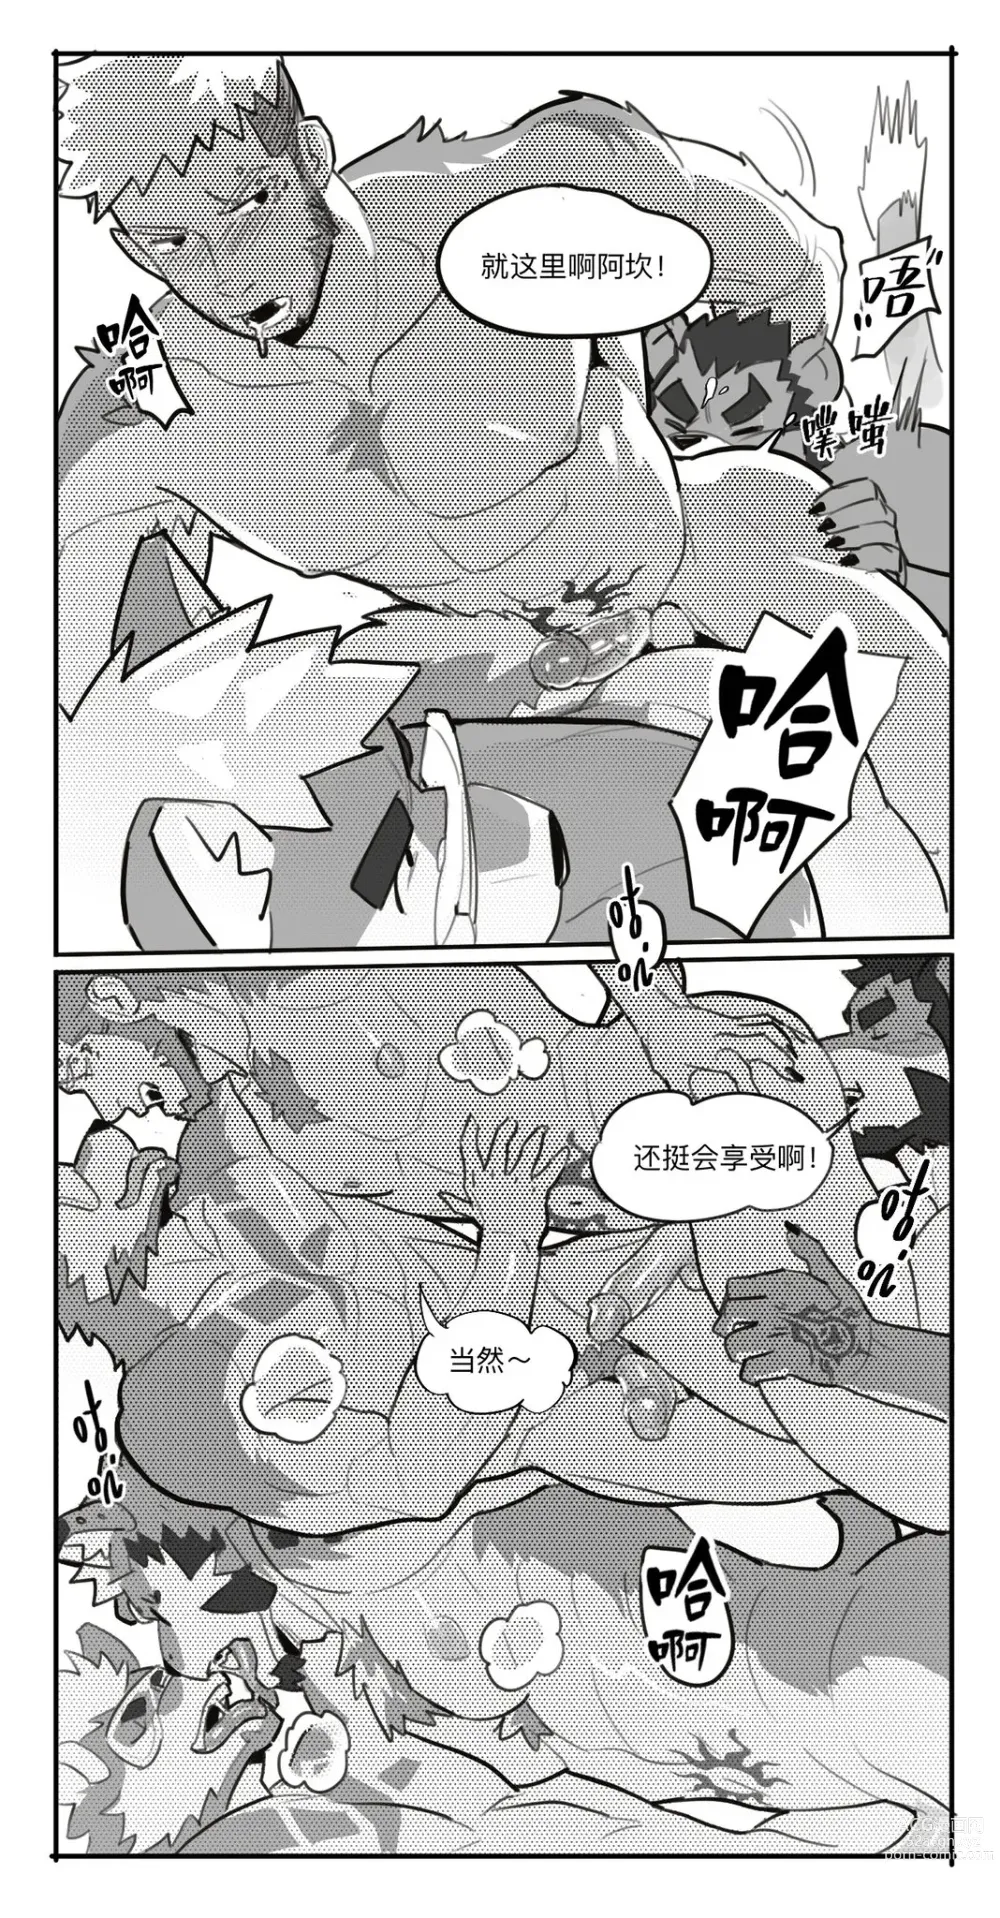 Page 23 of doujinshi Must Stick to the End